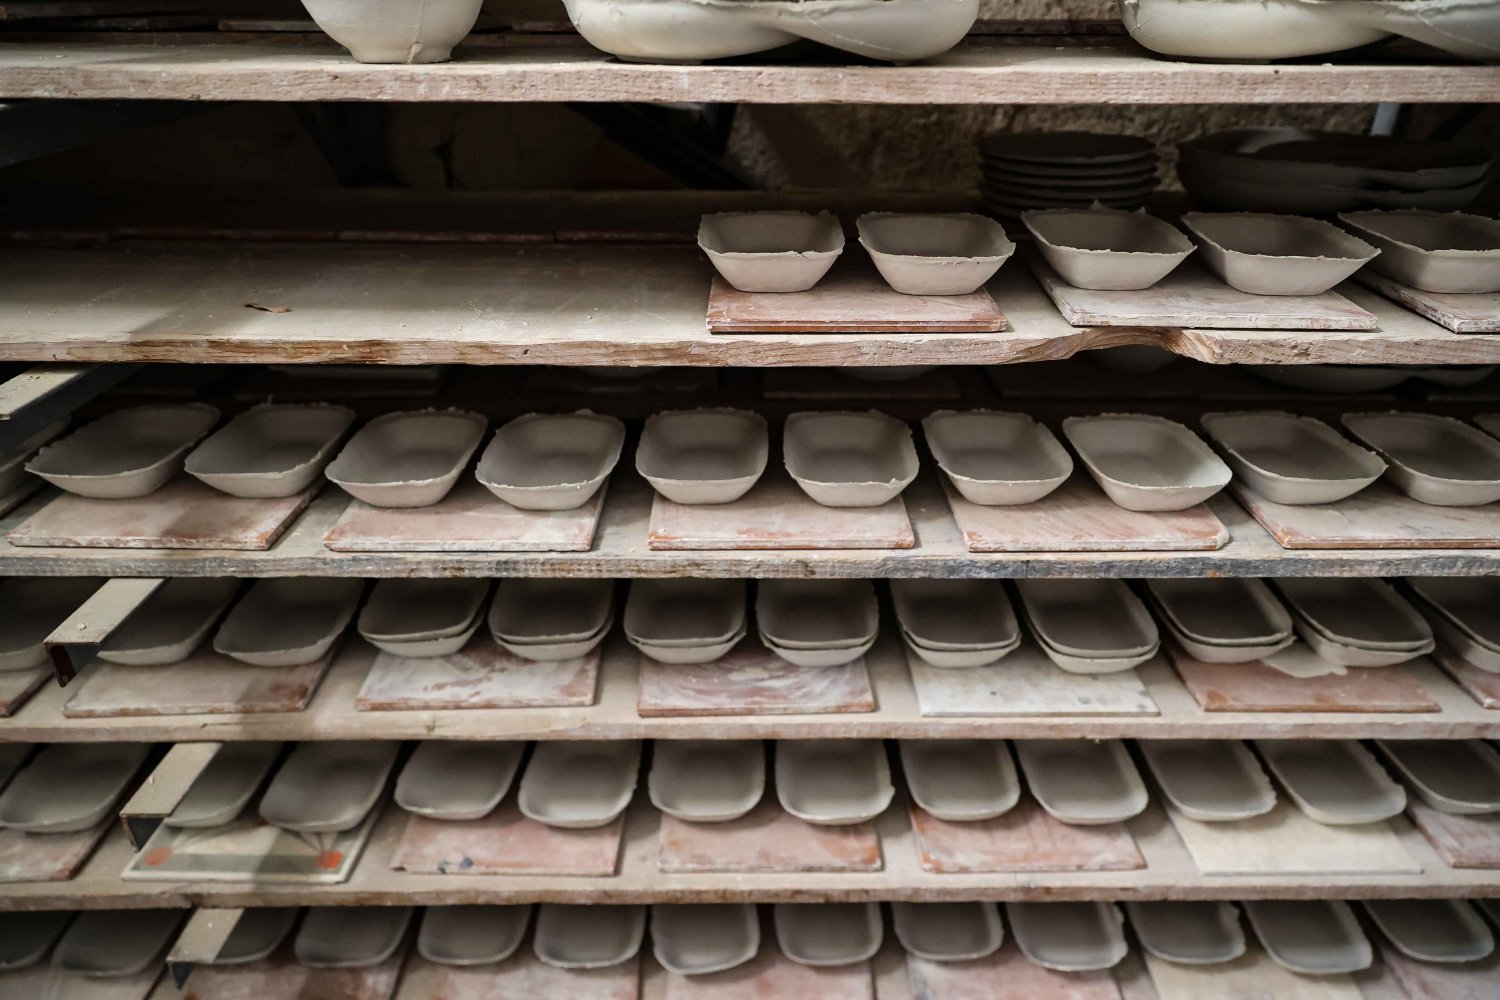 Plain clay ceramic art waits to be hand painted at the Balian design studio in East Jerusalem